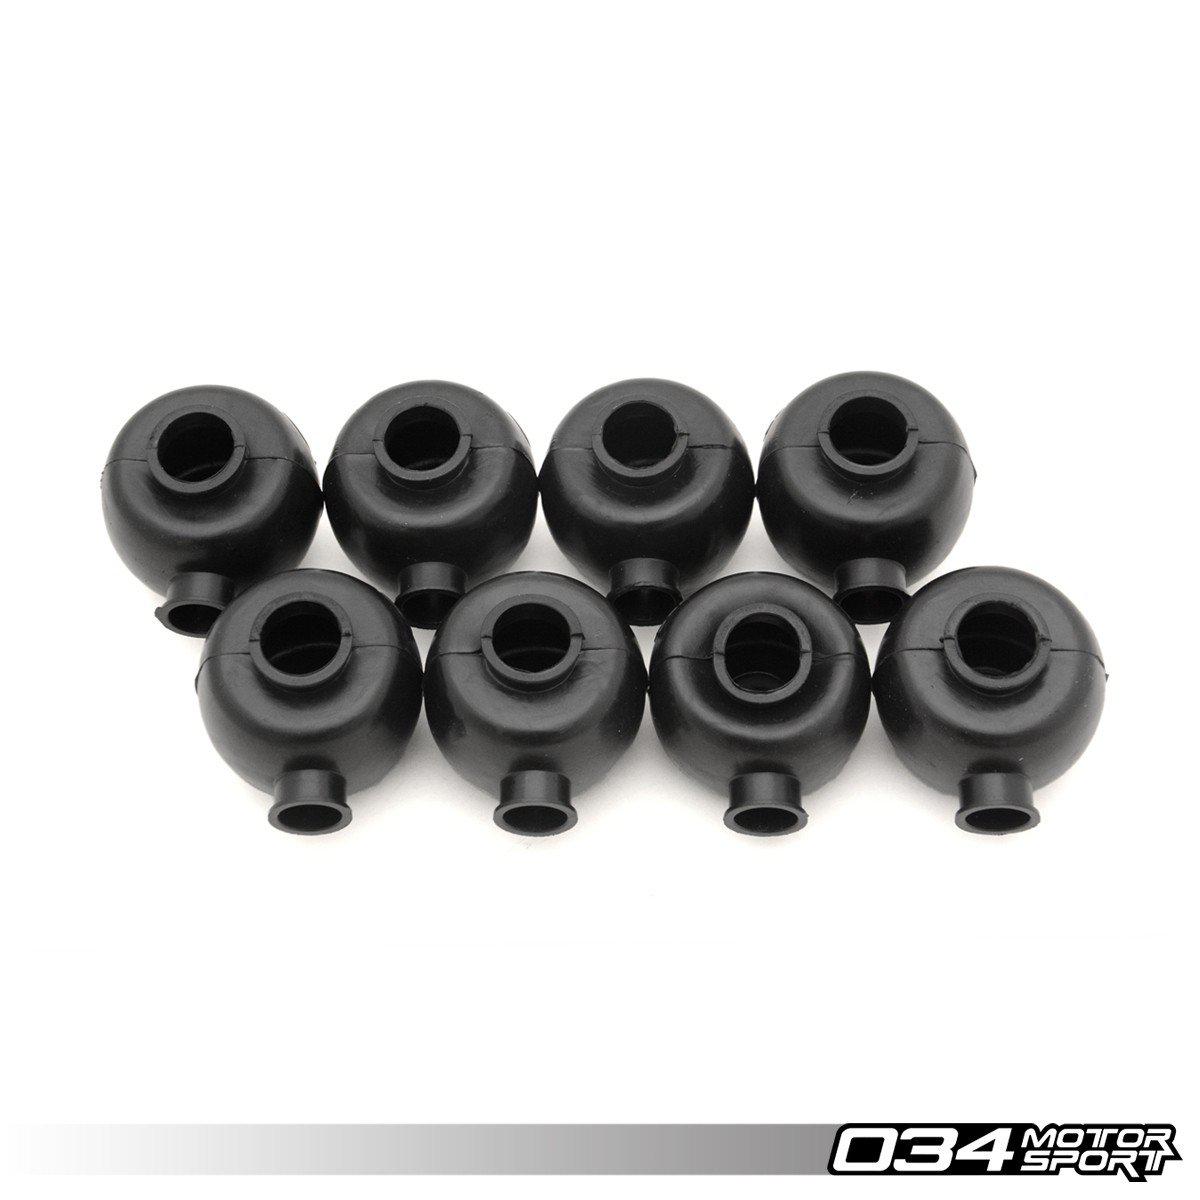 034Motorsport Adjustable Upper Control Arm Kit, Fully Spherical, Front B5/B6/B7-A Little Tuning Co